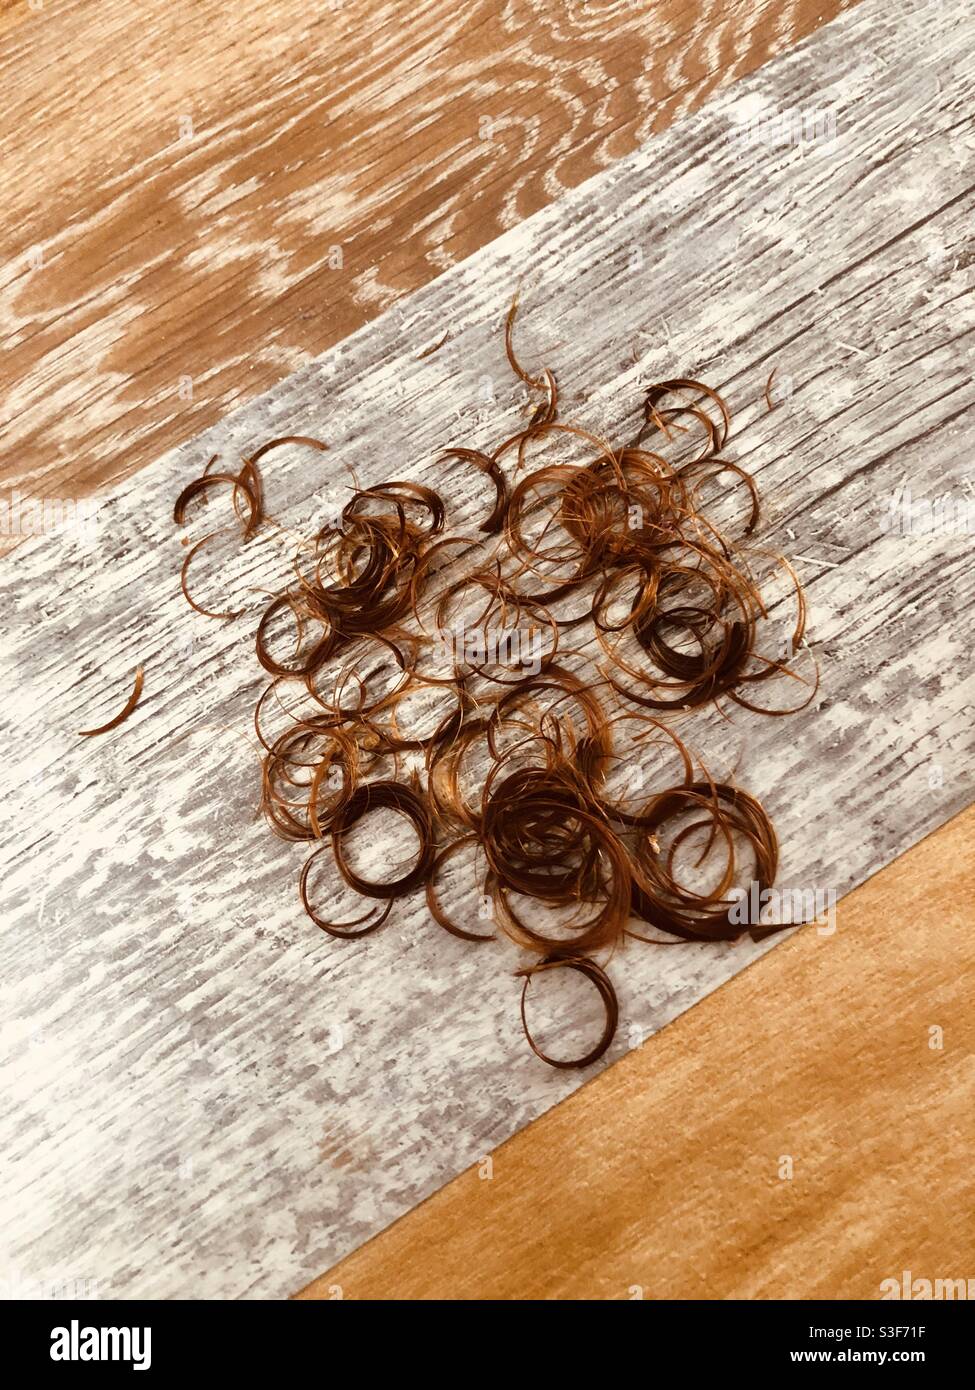 Curly ginger hair on floor after hair cut Stock Photo